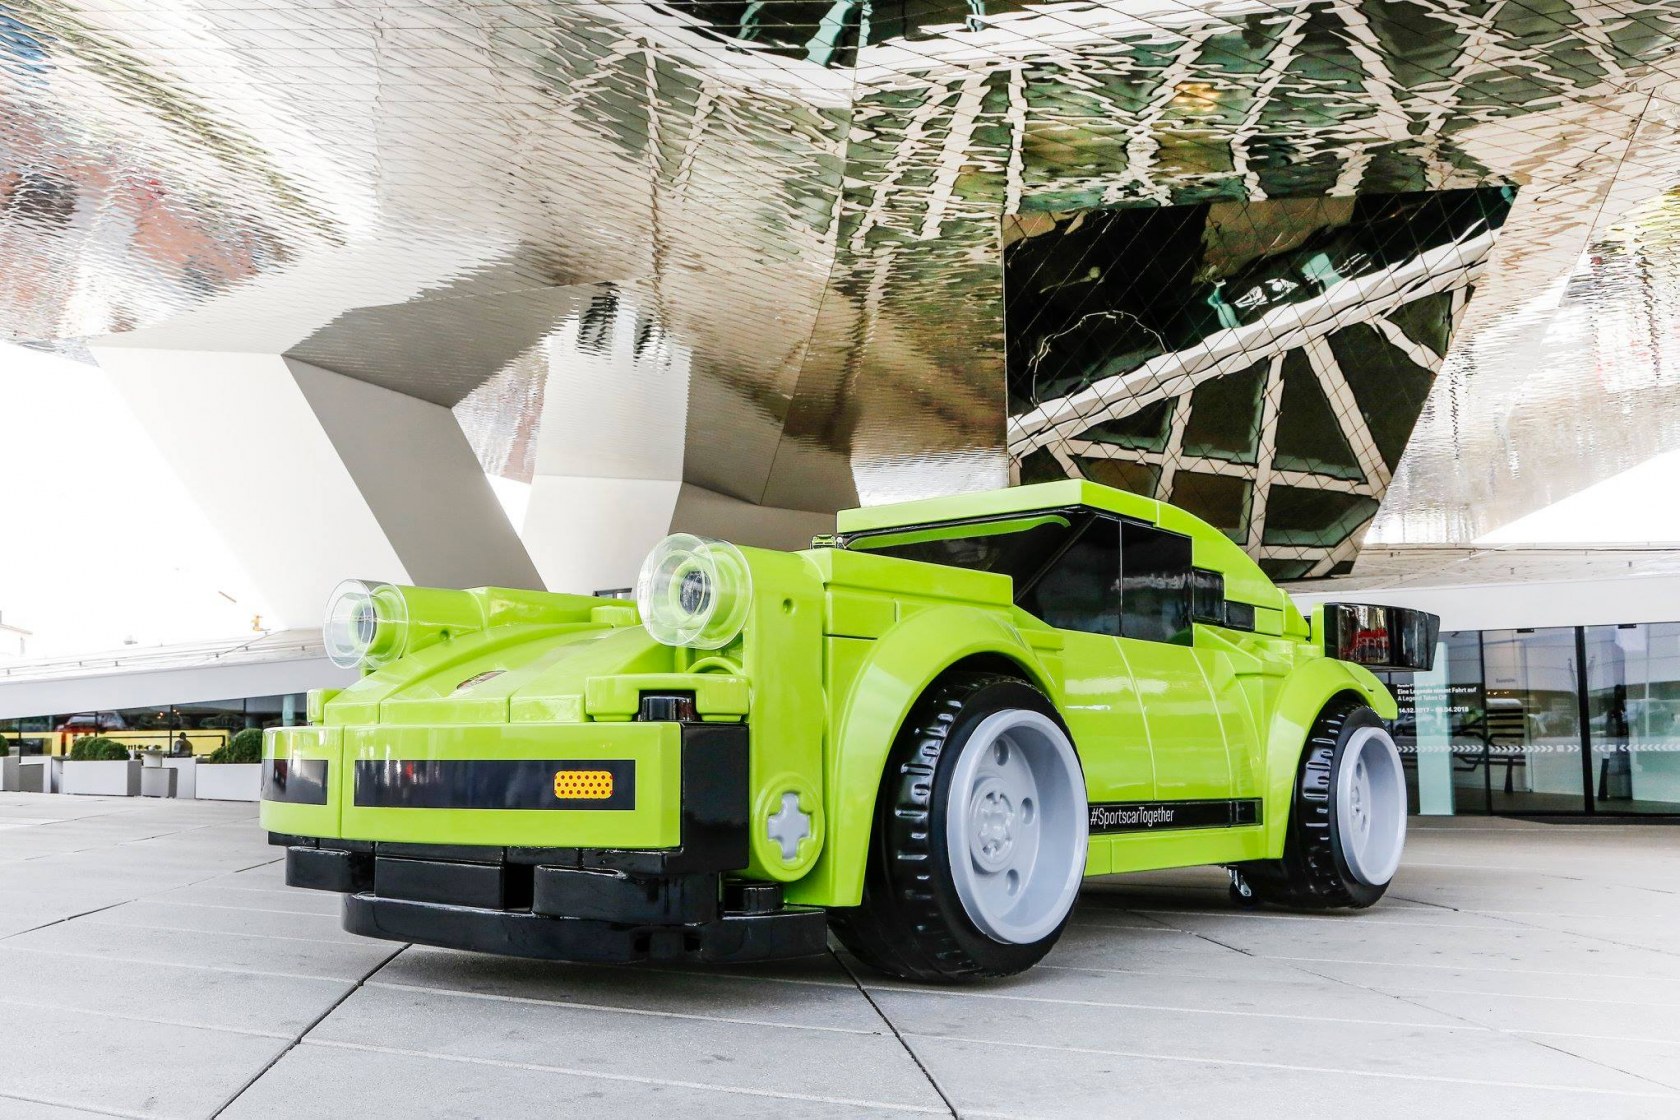 Porsche Museum shows off life-size 911 Turbo made from giant Lego bricks